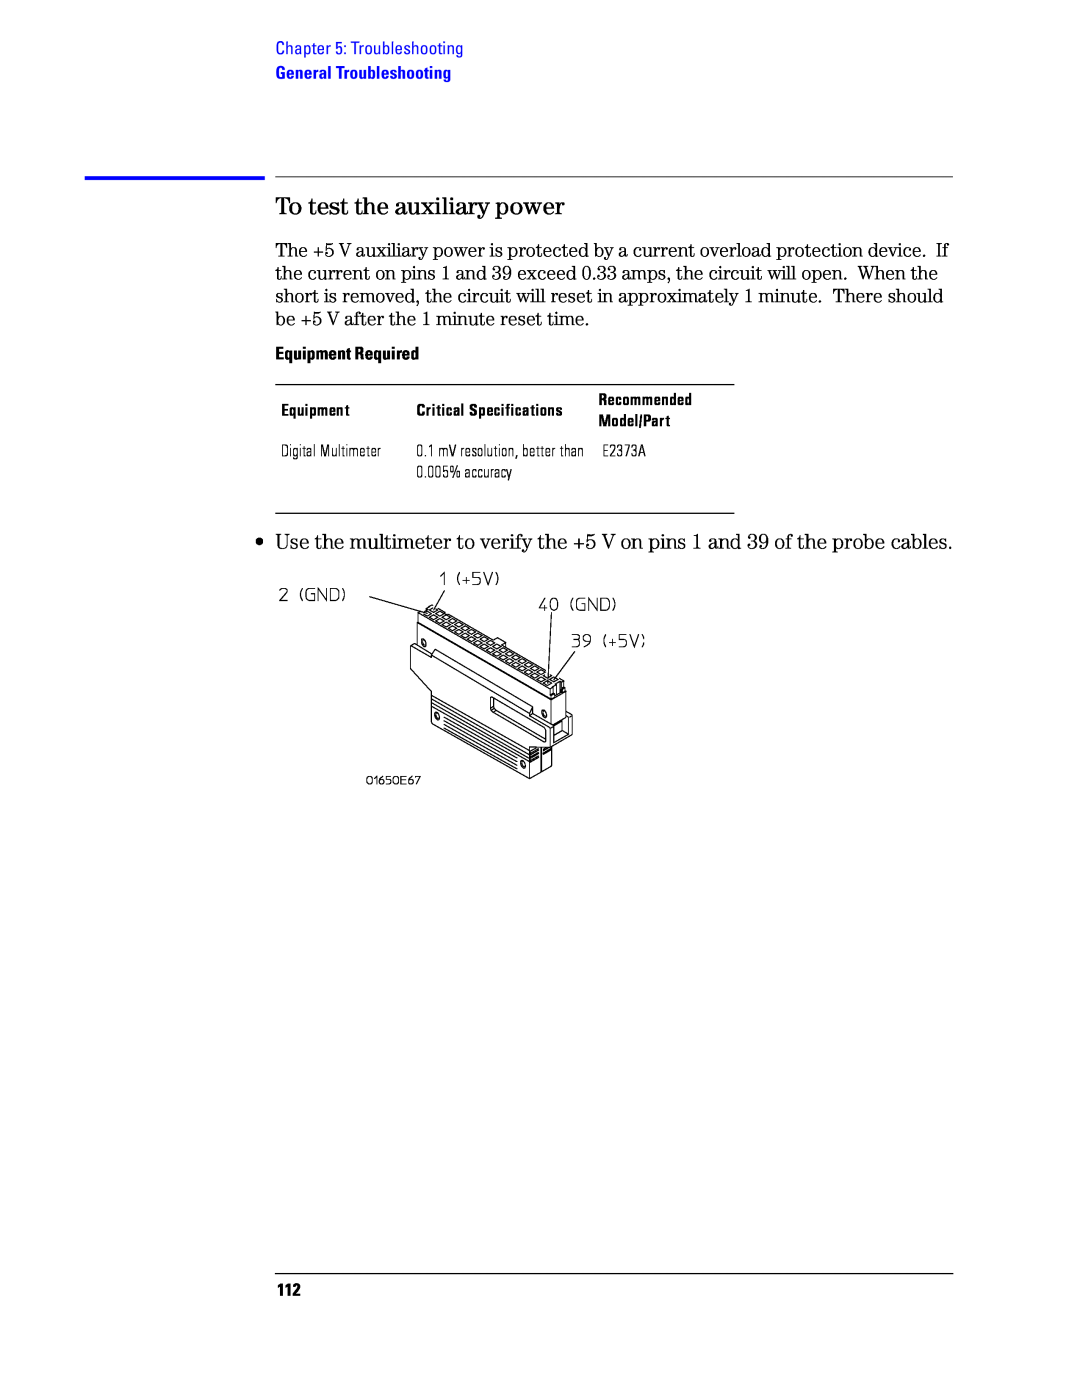 Agilent Technologies 1680, 1690 manual To test the auxiliary power, Recommended 